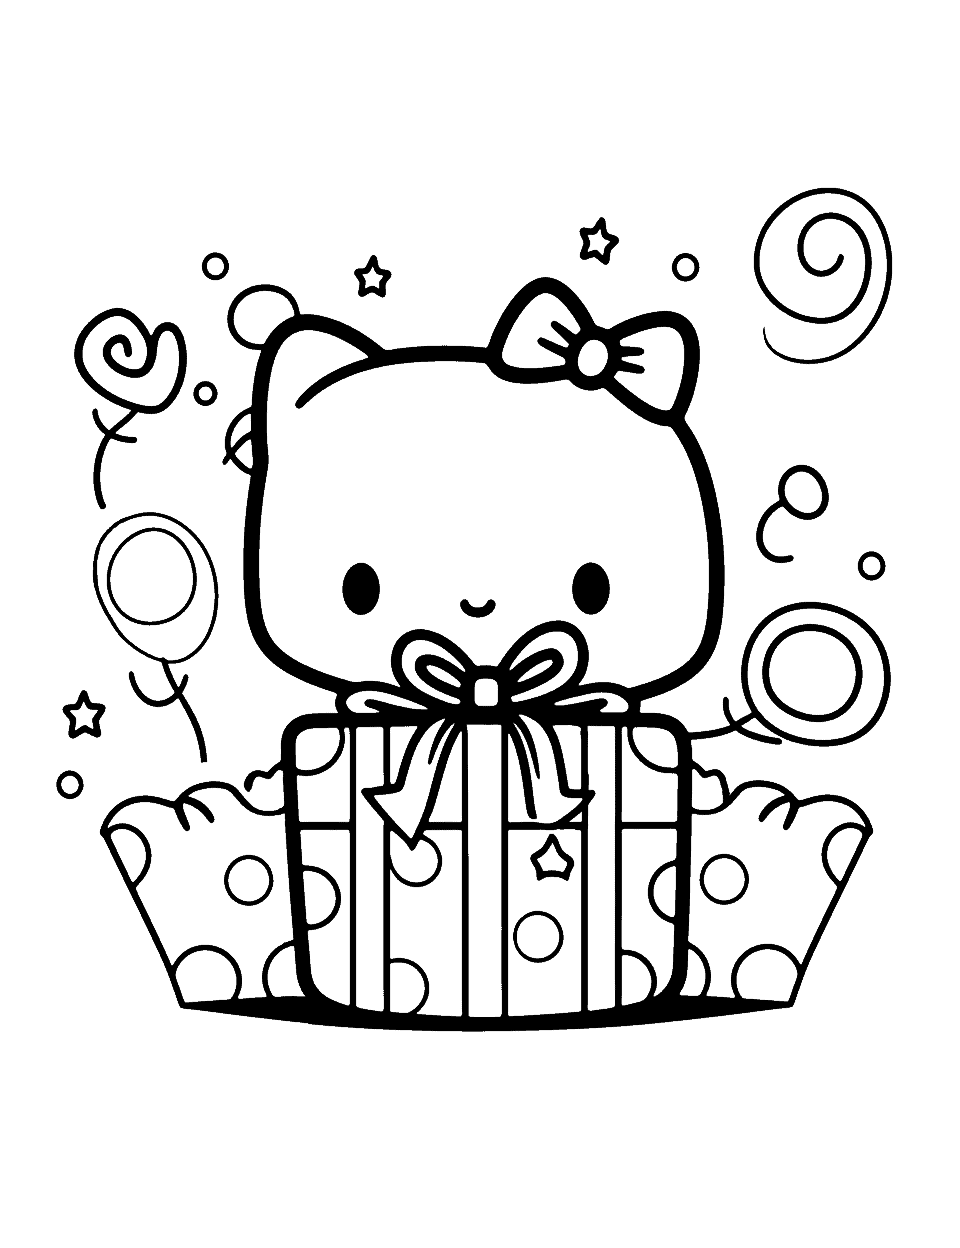 Hello Kitty's Birthday Surprise Happy Coloring Page - Hello Kitty unwrapping a birthday present with her friends.